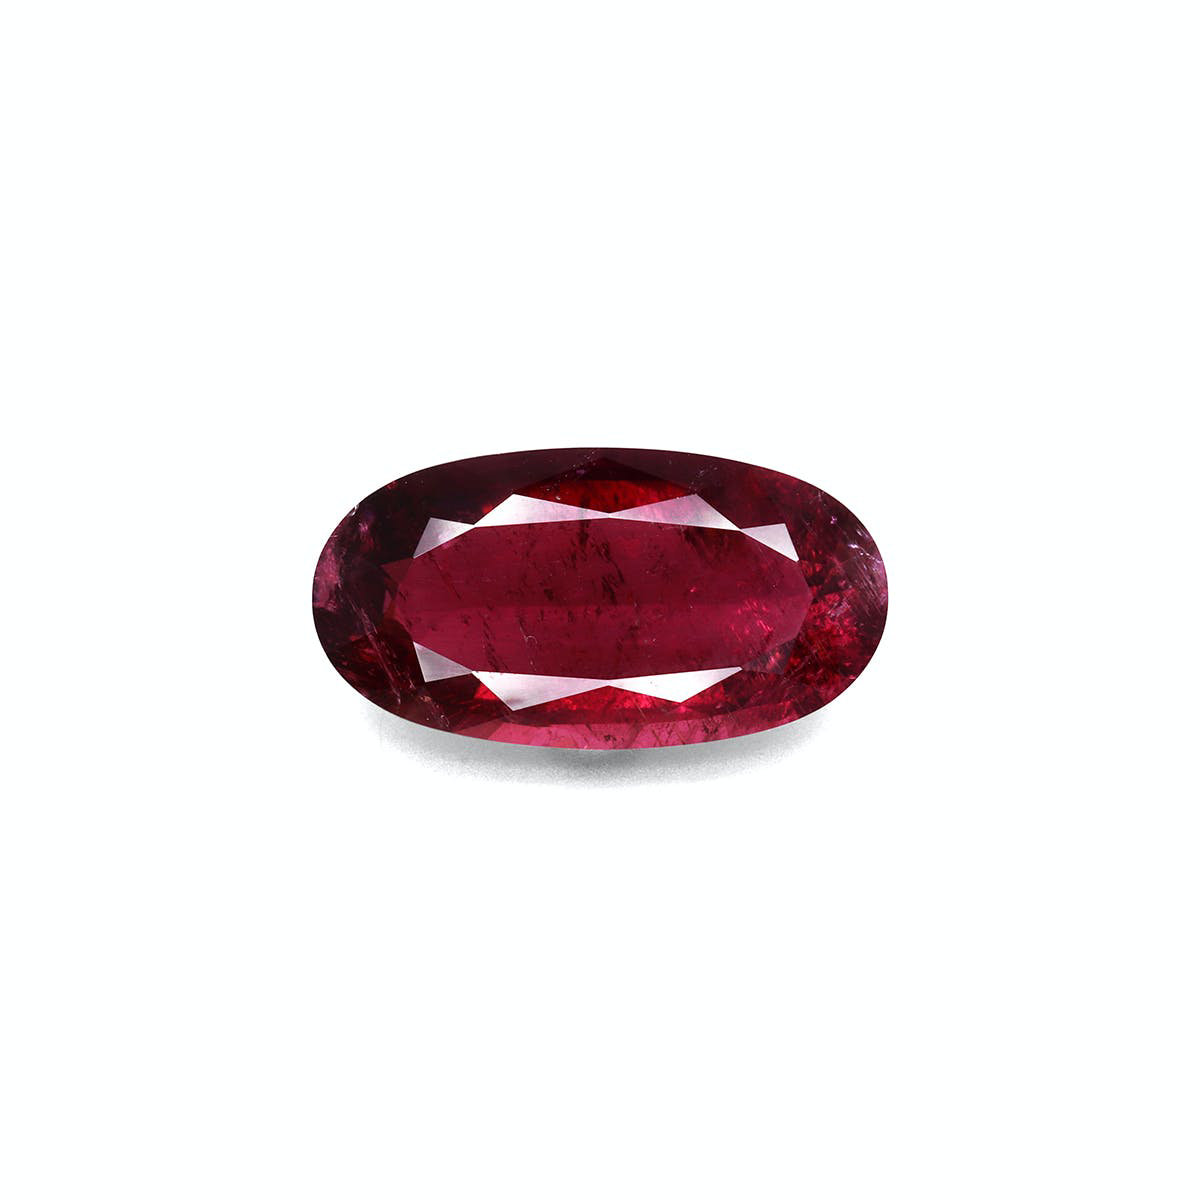 Picture of Red Rubellite Tourmaline 15.19ct (RL0214)